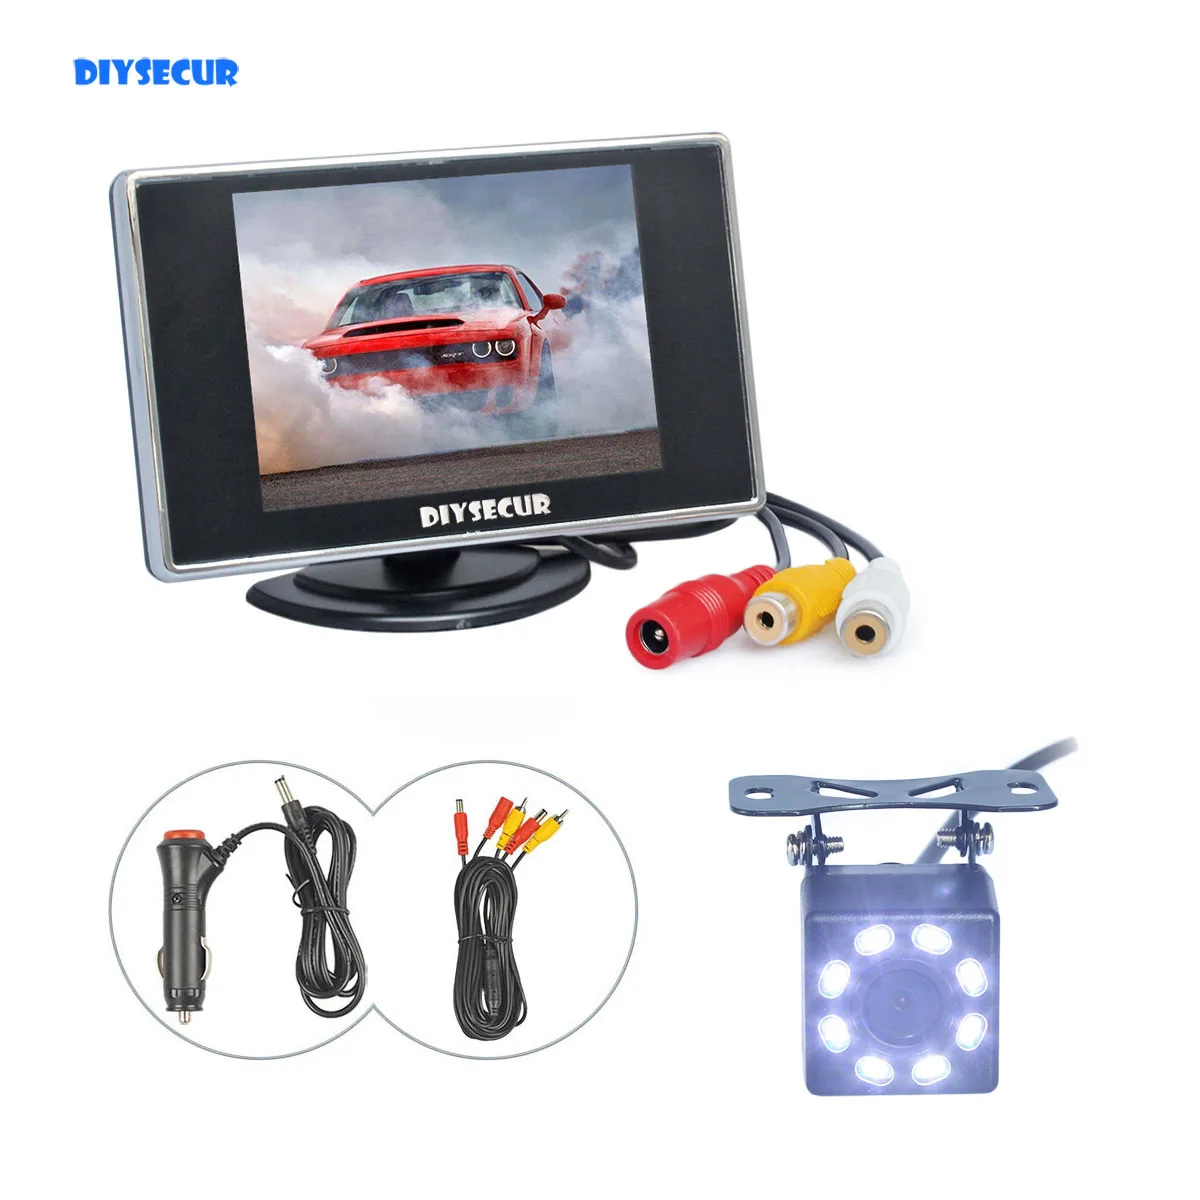 

DIYSECUR Wire 3.5inch TFT LCD Backup HD Car Monitor Rear View Car LED Camera Kit Reversing Auto Parking Assistance System